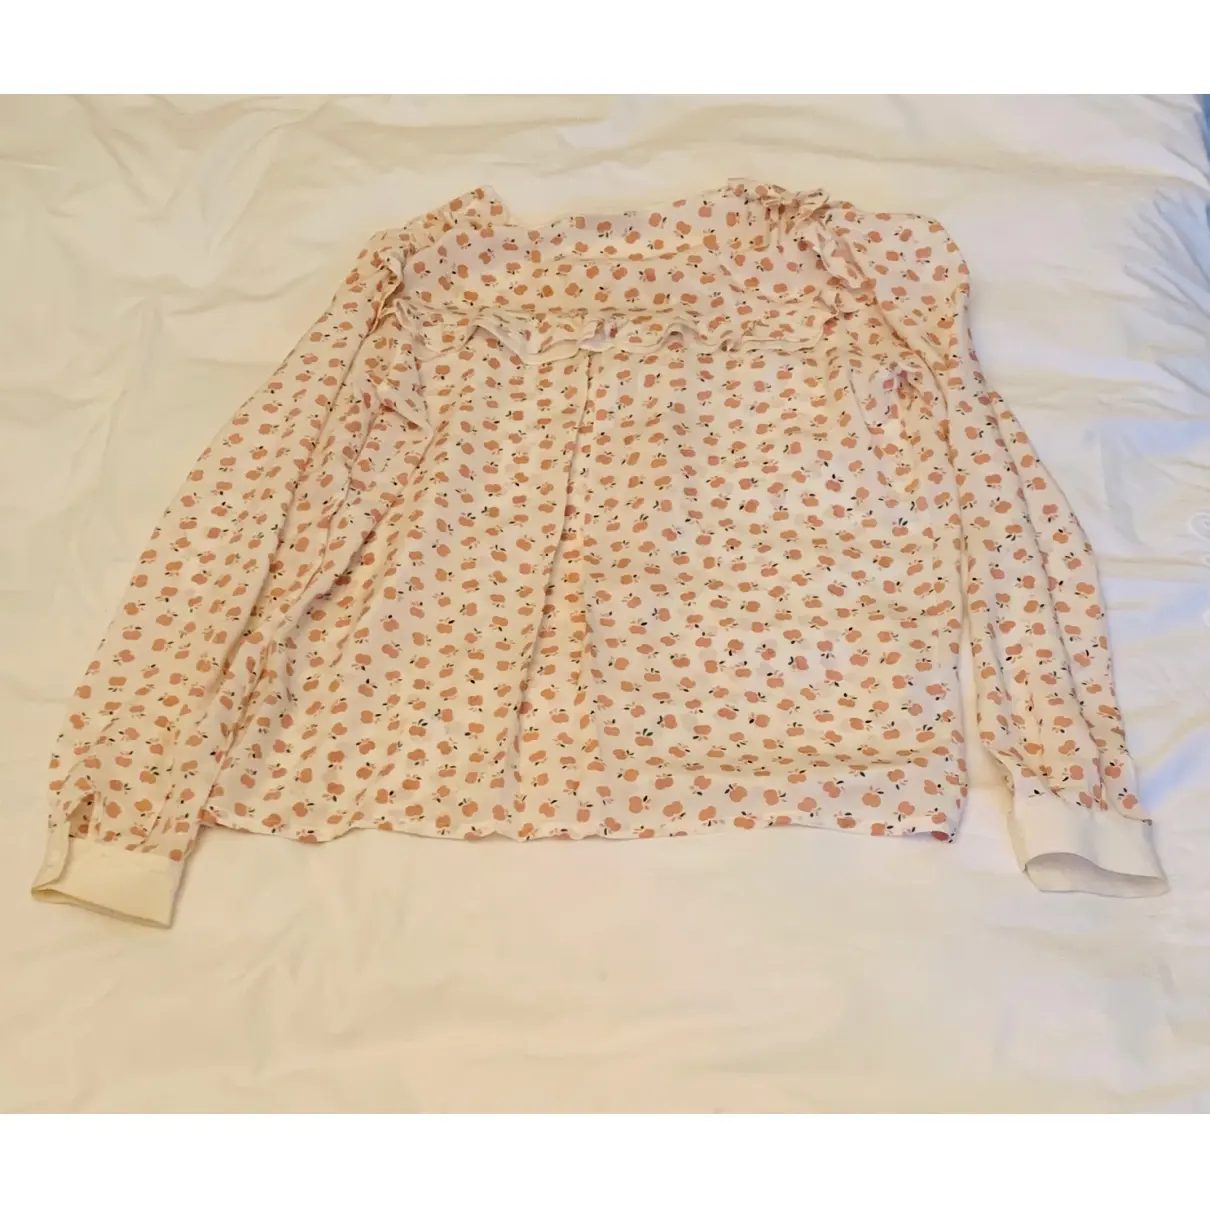 Bel Air Silk blouse for sale